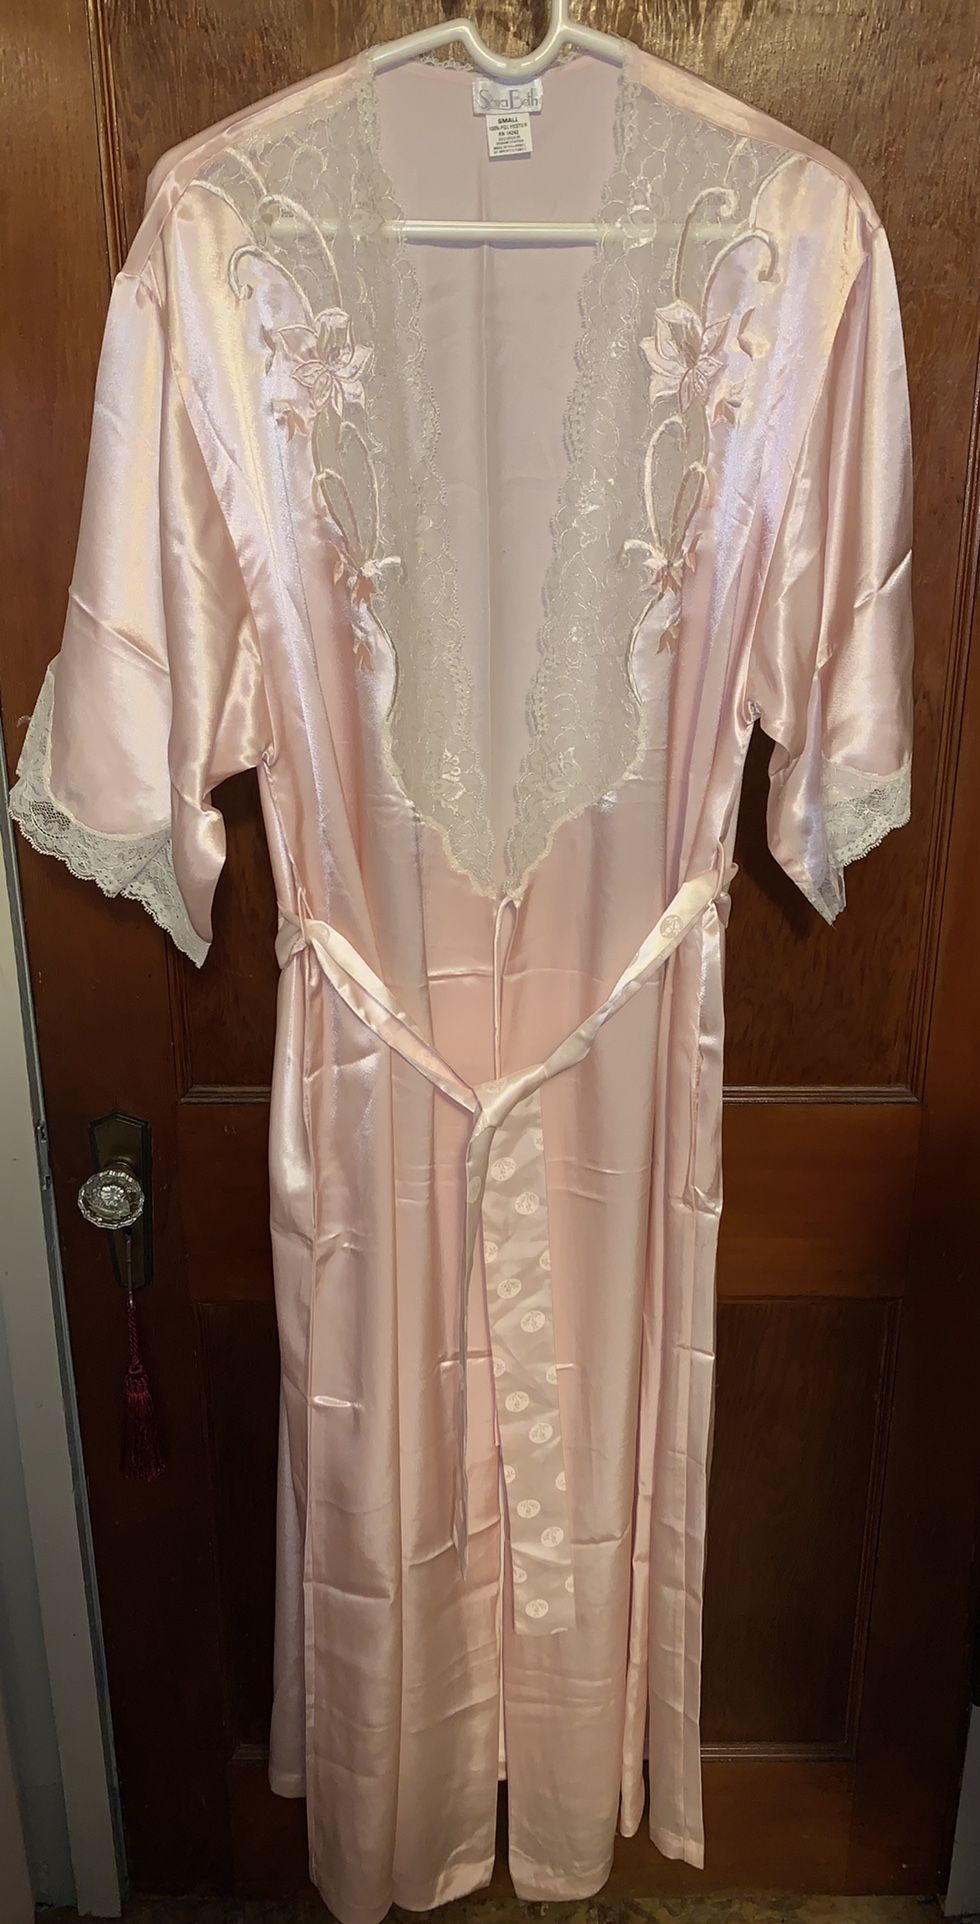 LADIES LACE AND SATINY FULL LENGHT LINGERIE ROBE by SARA BETH in PALE PINK OPEN BOX - UNUSED PRISTINE LOUNGE WEAR SIZE SMALL/REGULAR